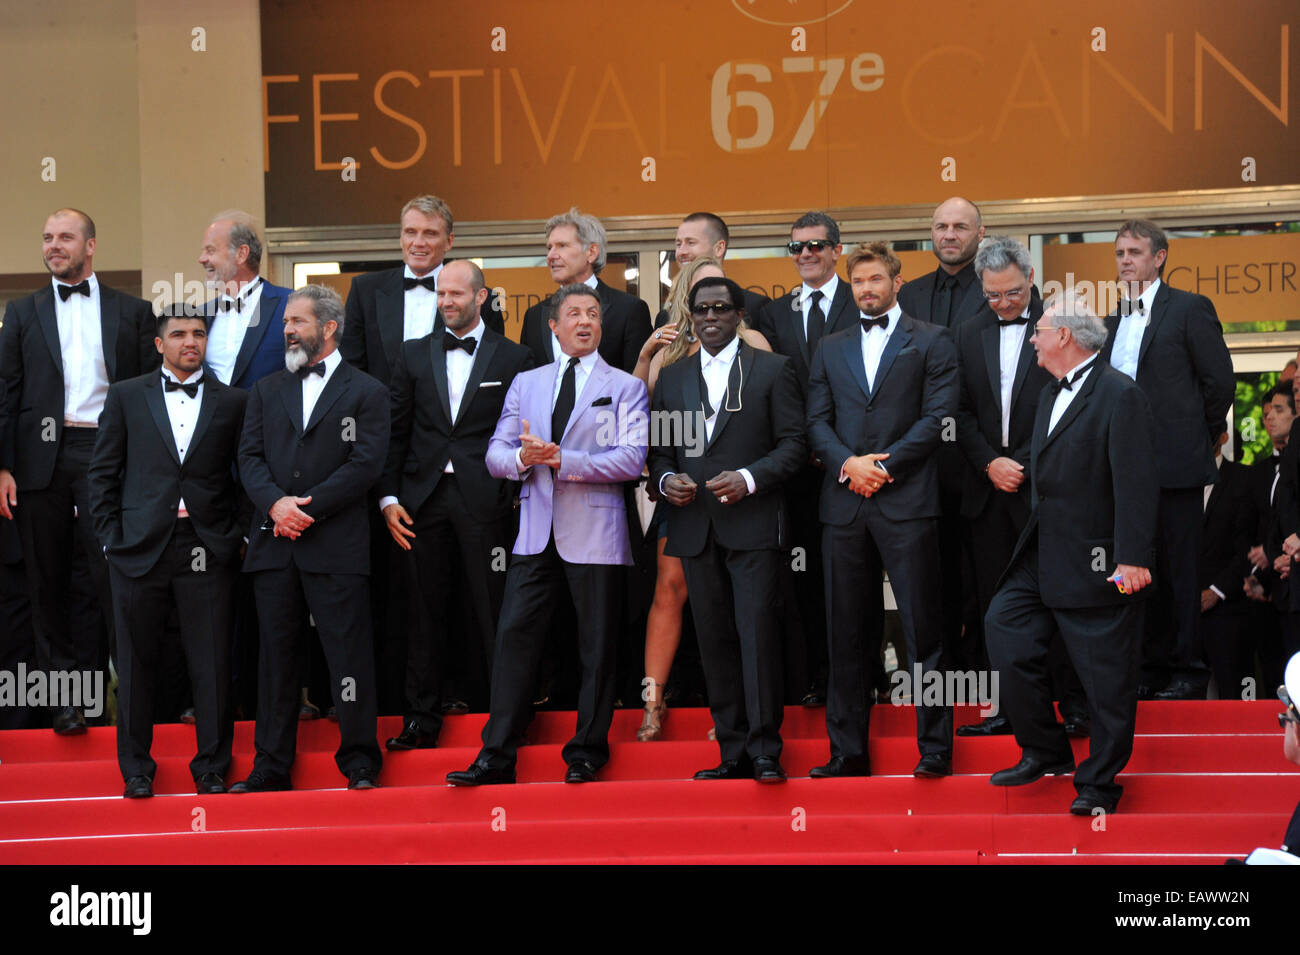 The 67th Annual Cannes Film Festival - 'The Expendables 3' premiere - Arrivals  Featuring: Kelsey Grammer,Dolph Lundgren,Harrison Ford,Patrick Hughes,Glen Powell,Antonio Banderas,Randy Couture,Victor Ortiz,Mel Gibson,Jason Statham,Sylvester Stallone,Ronda Rousey,Wesley Snipes,Kellan Lutz Where: Cannes When: 18 May 2014 Stock Photo